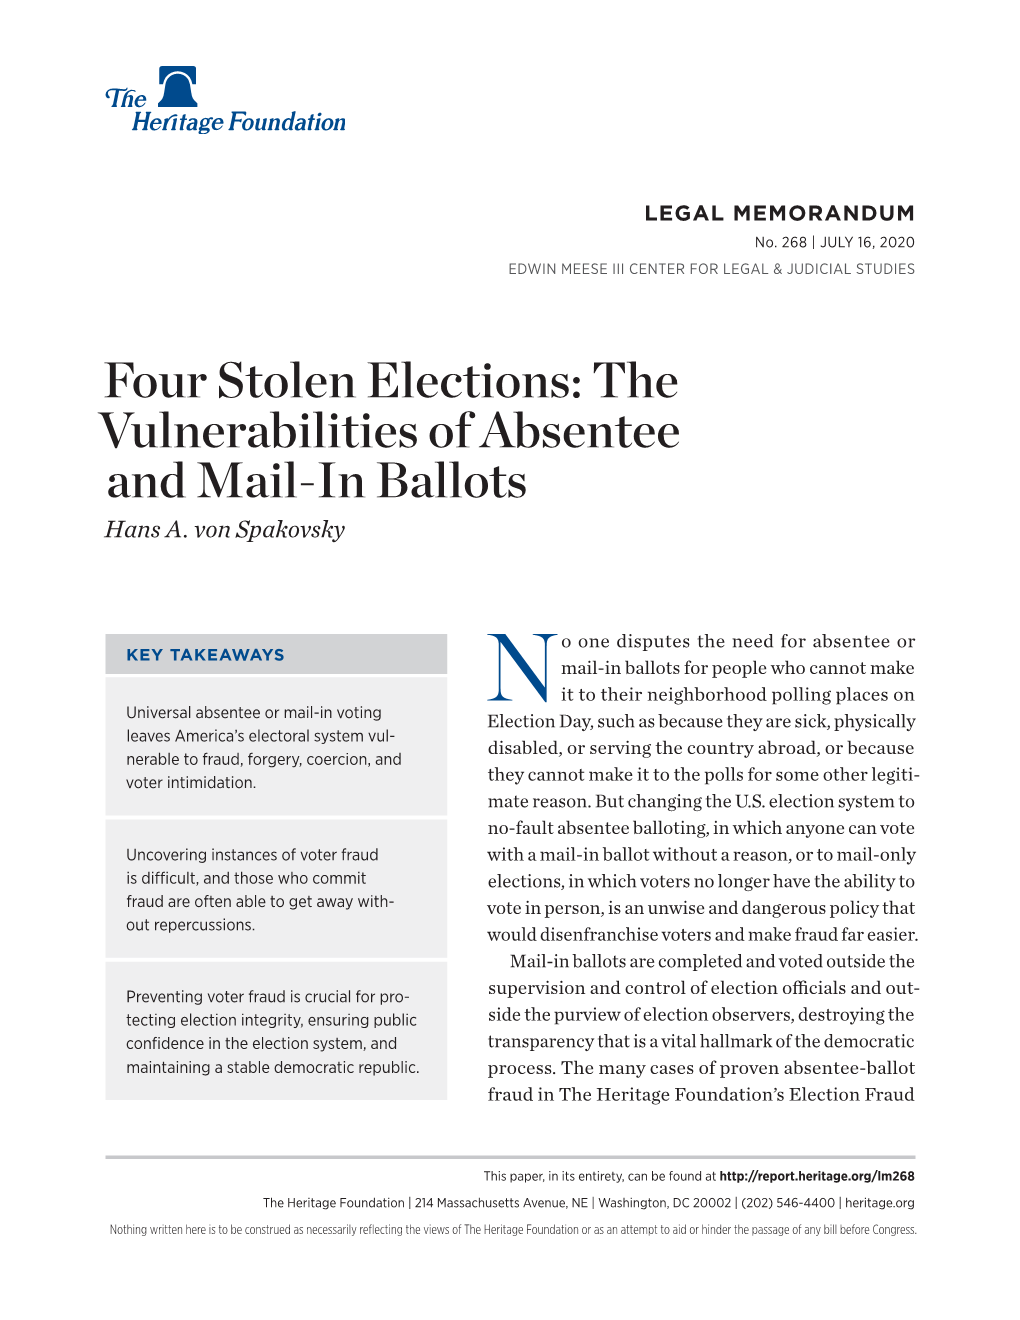 The Vulnerabilities of Absentee and Mail-In Ballots Hans A